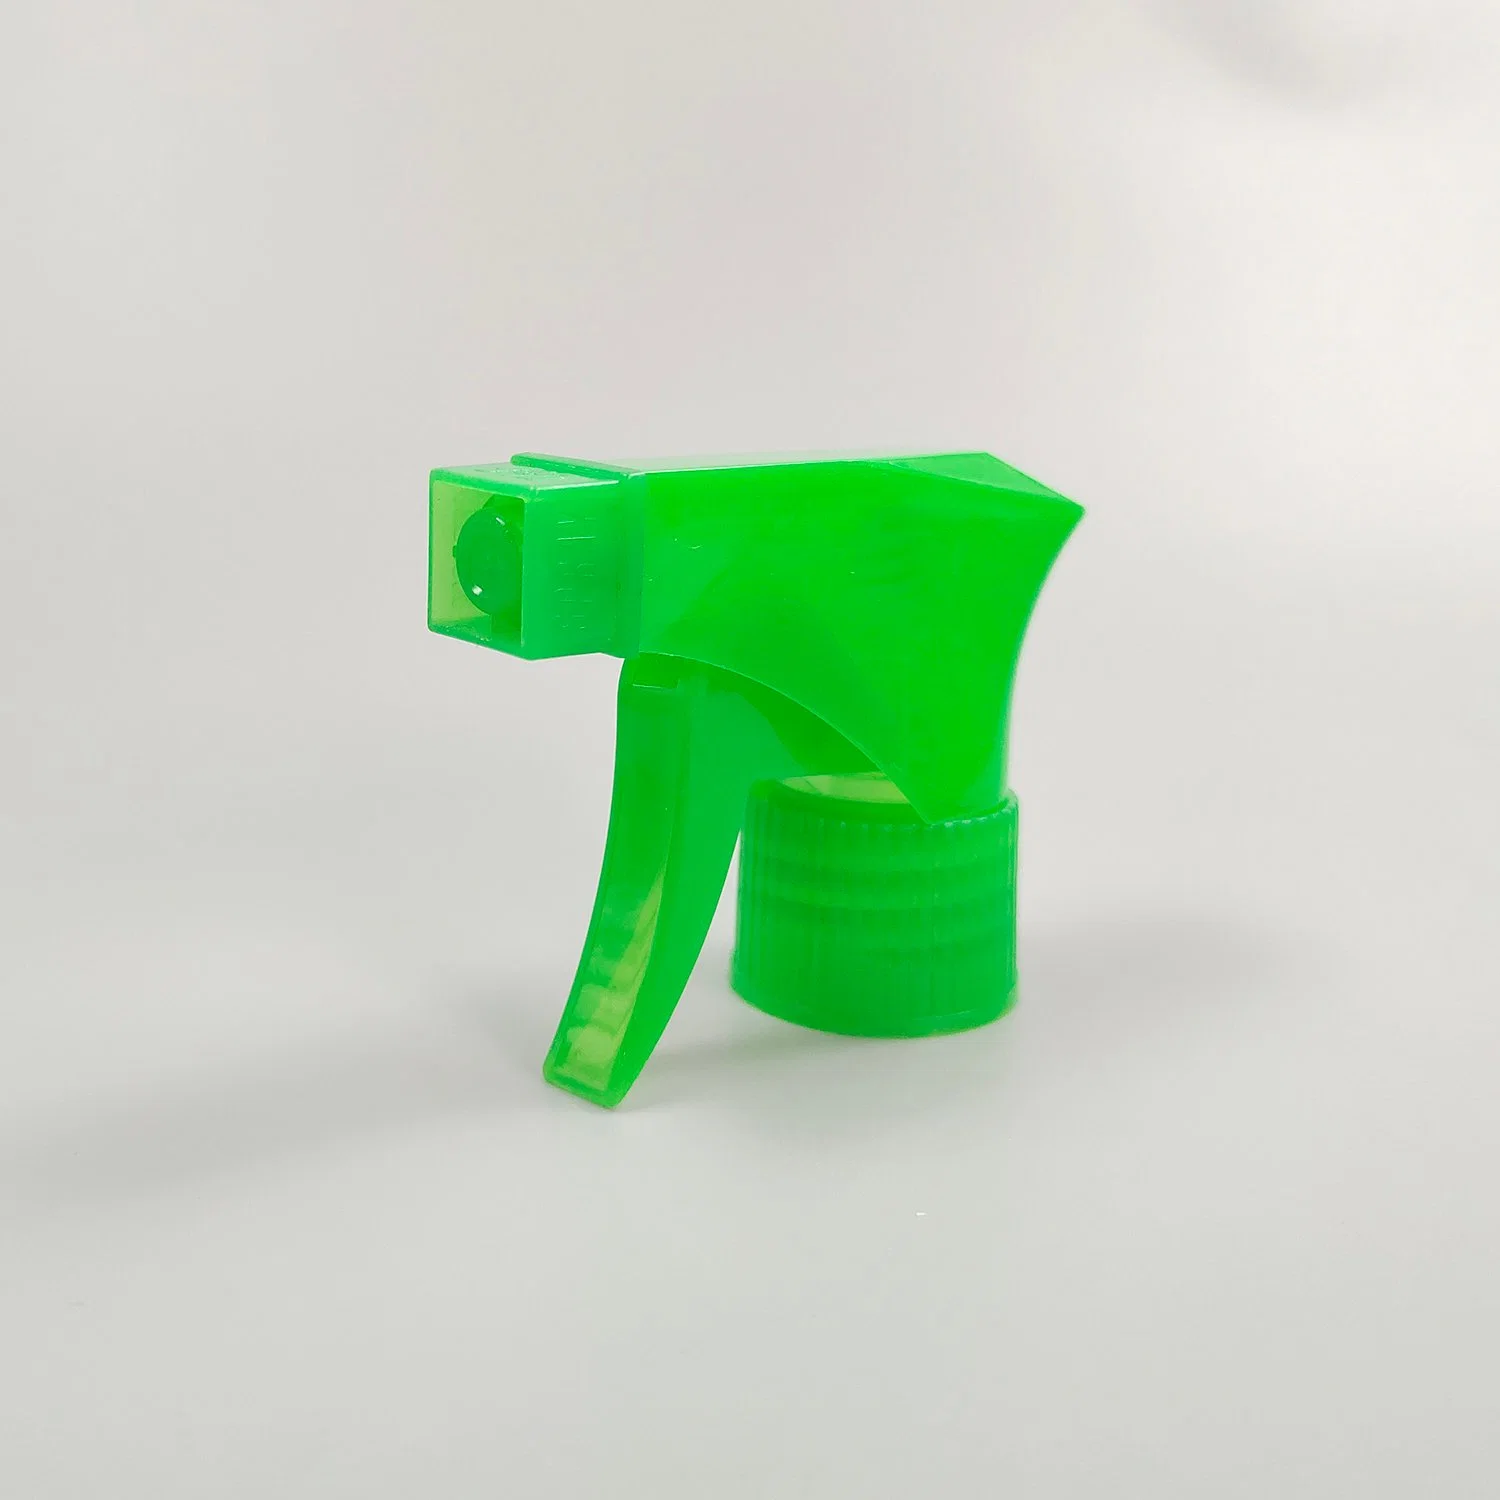 Transparent Green Color Plastic Trigger Sprayer 28mm for Daily Cleaning Household Cleaning